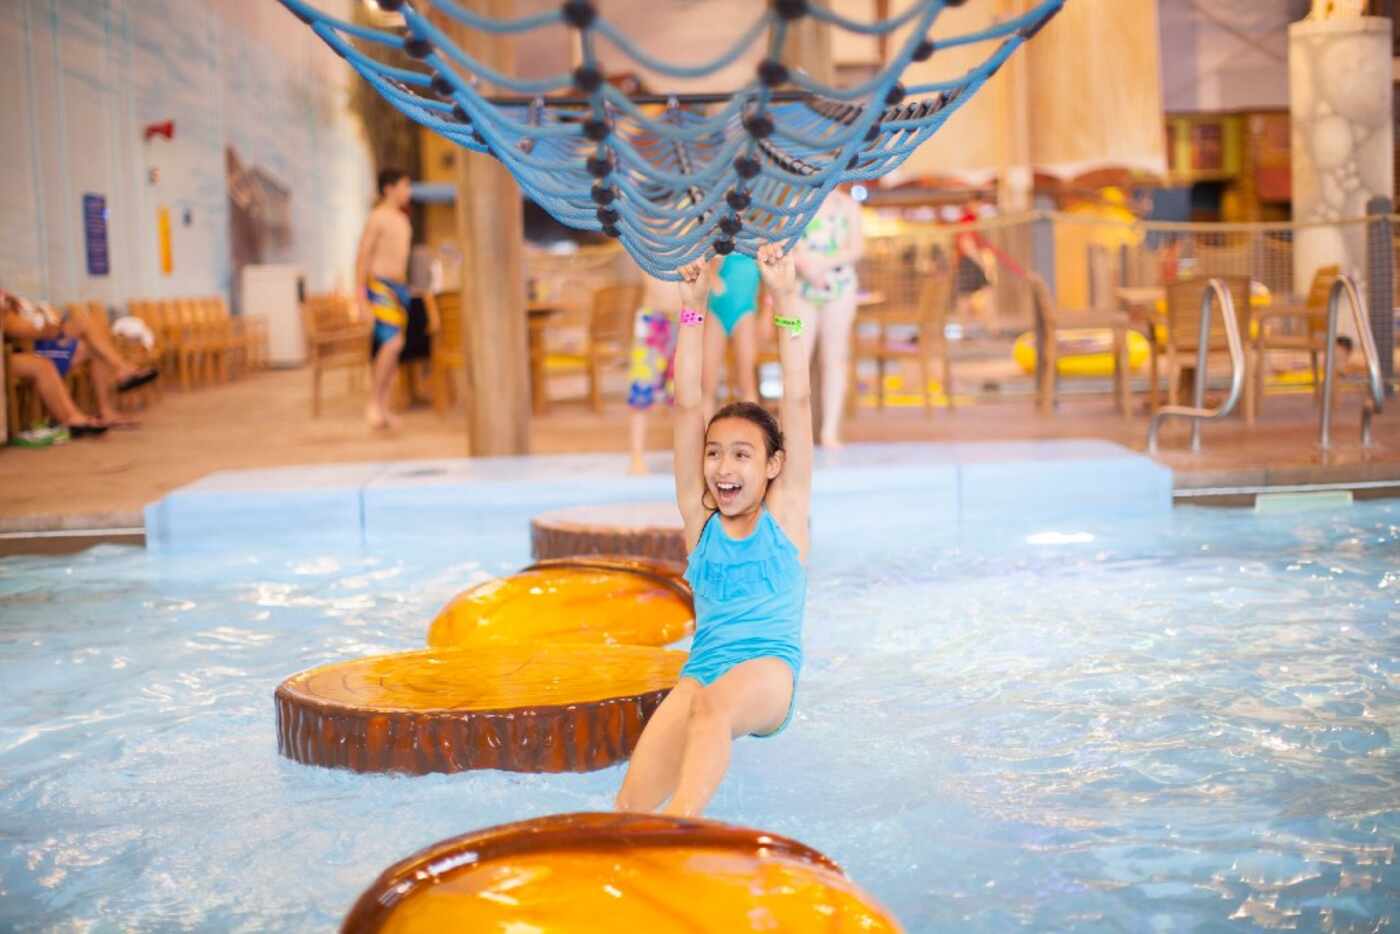 Great Wolf Lodge in Grapevine has an indoor water park and is offering discounts for stays...